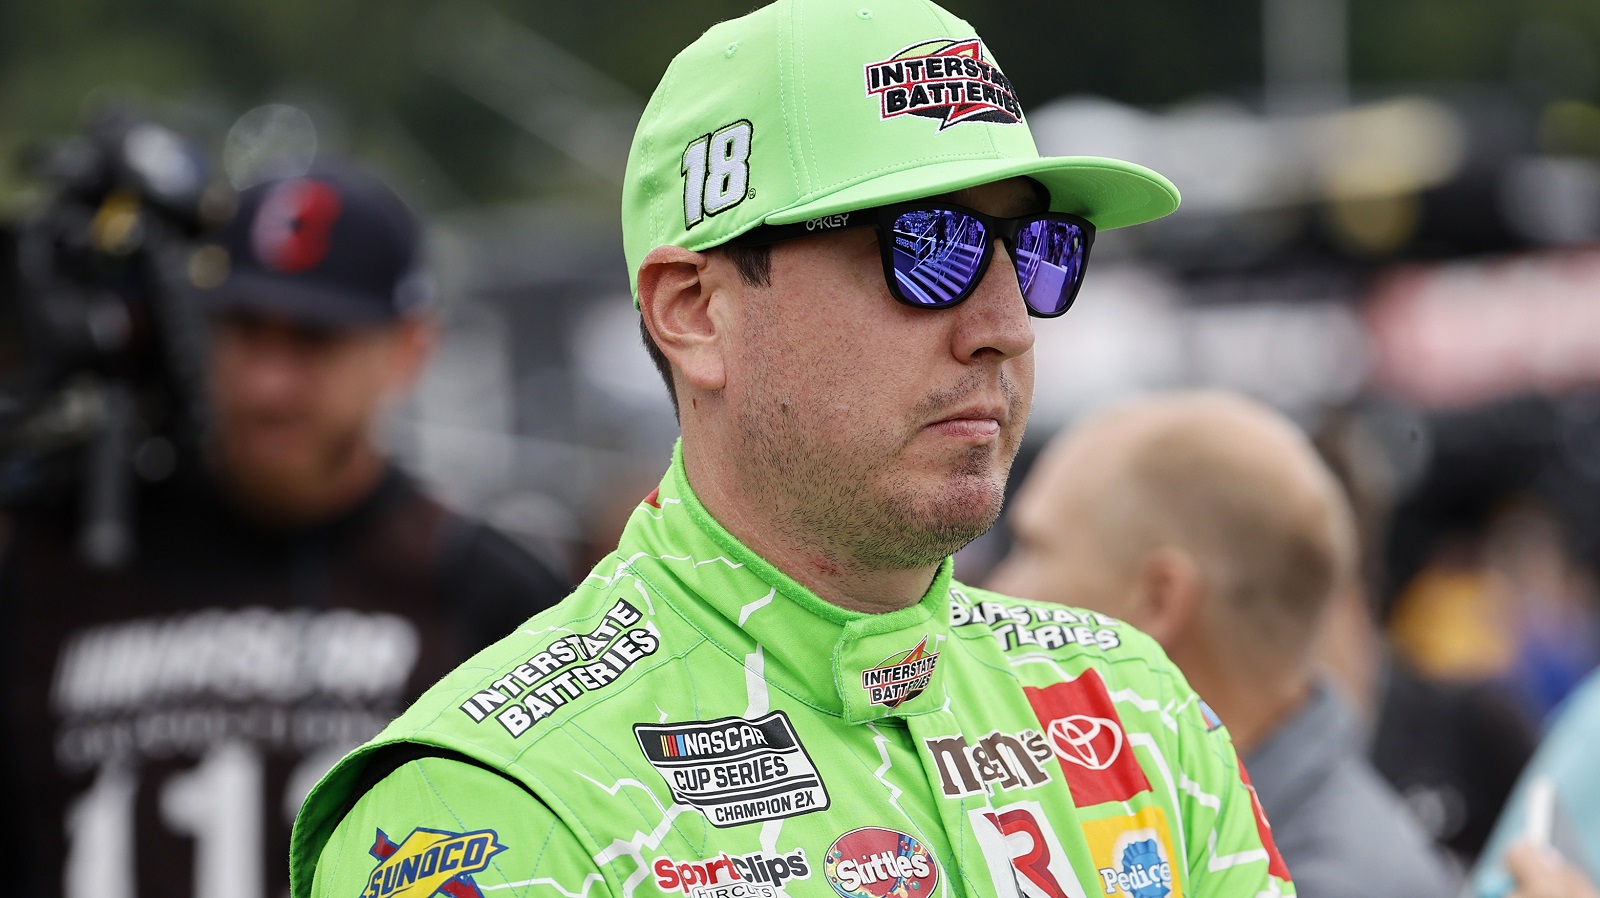 Kyle Busch Must Be Shaking His Head Over the Latest JGR Development